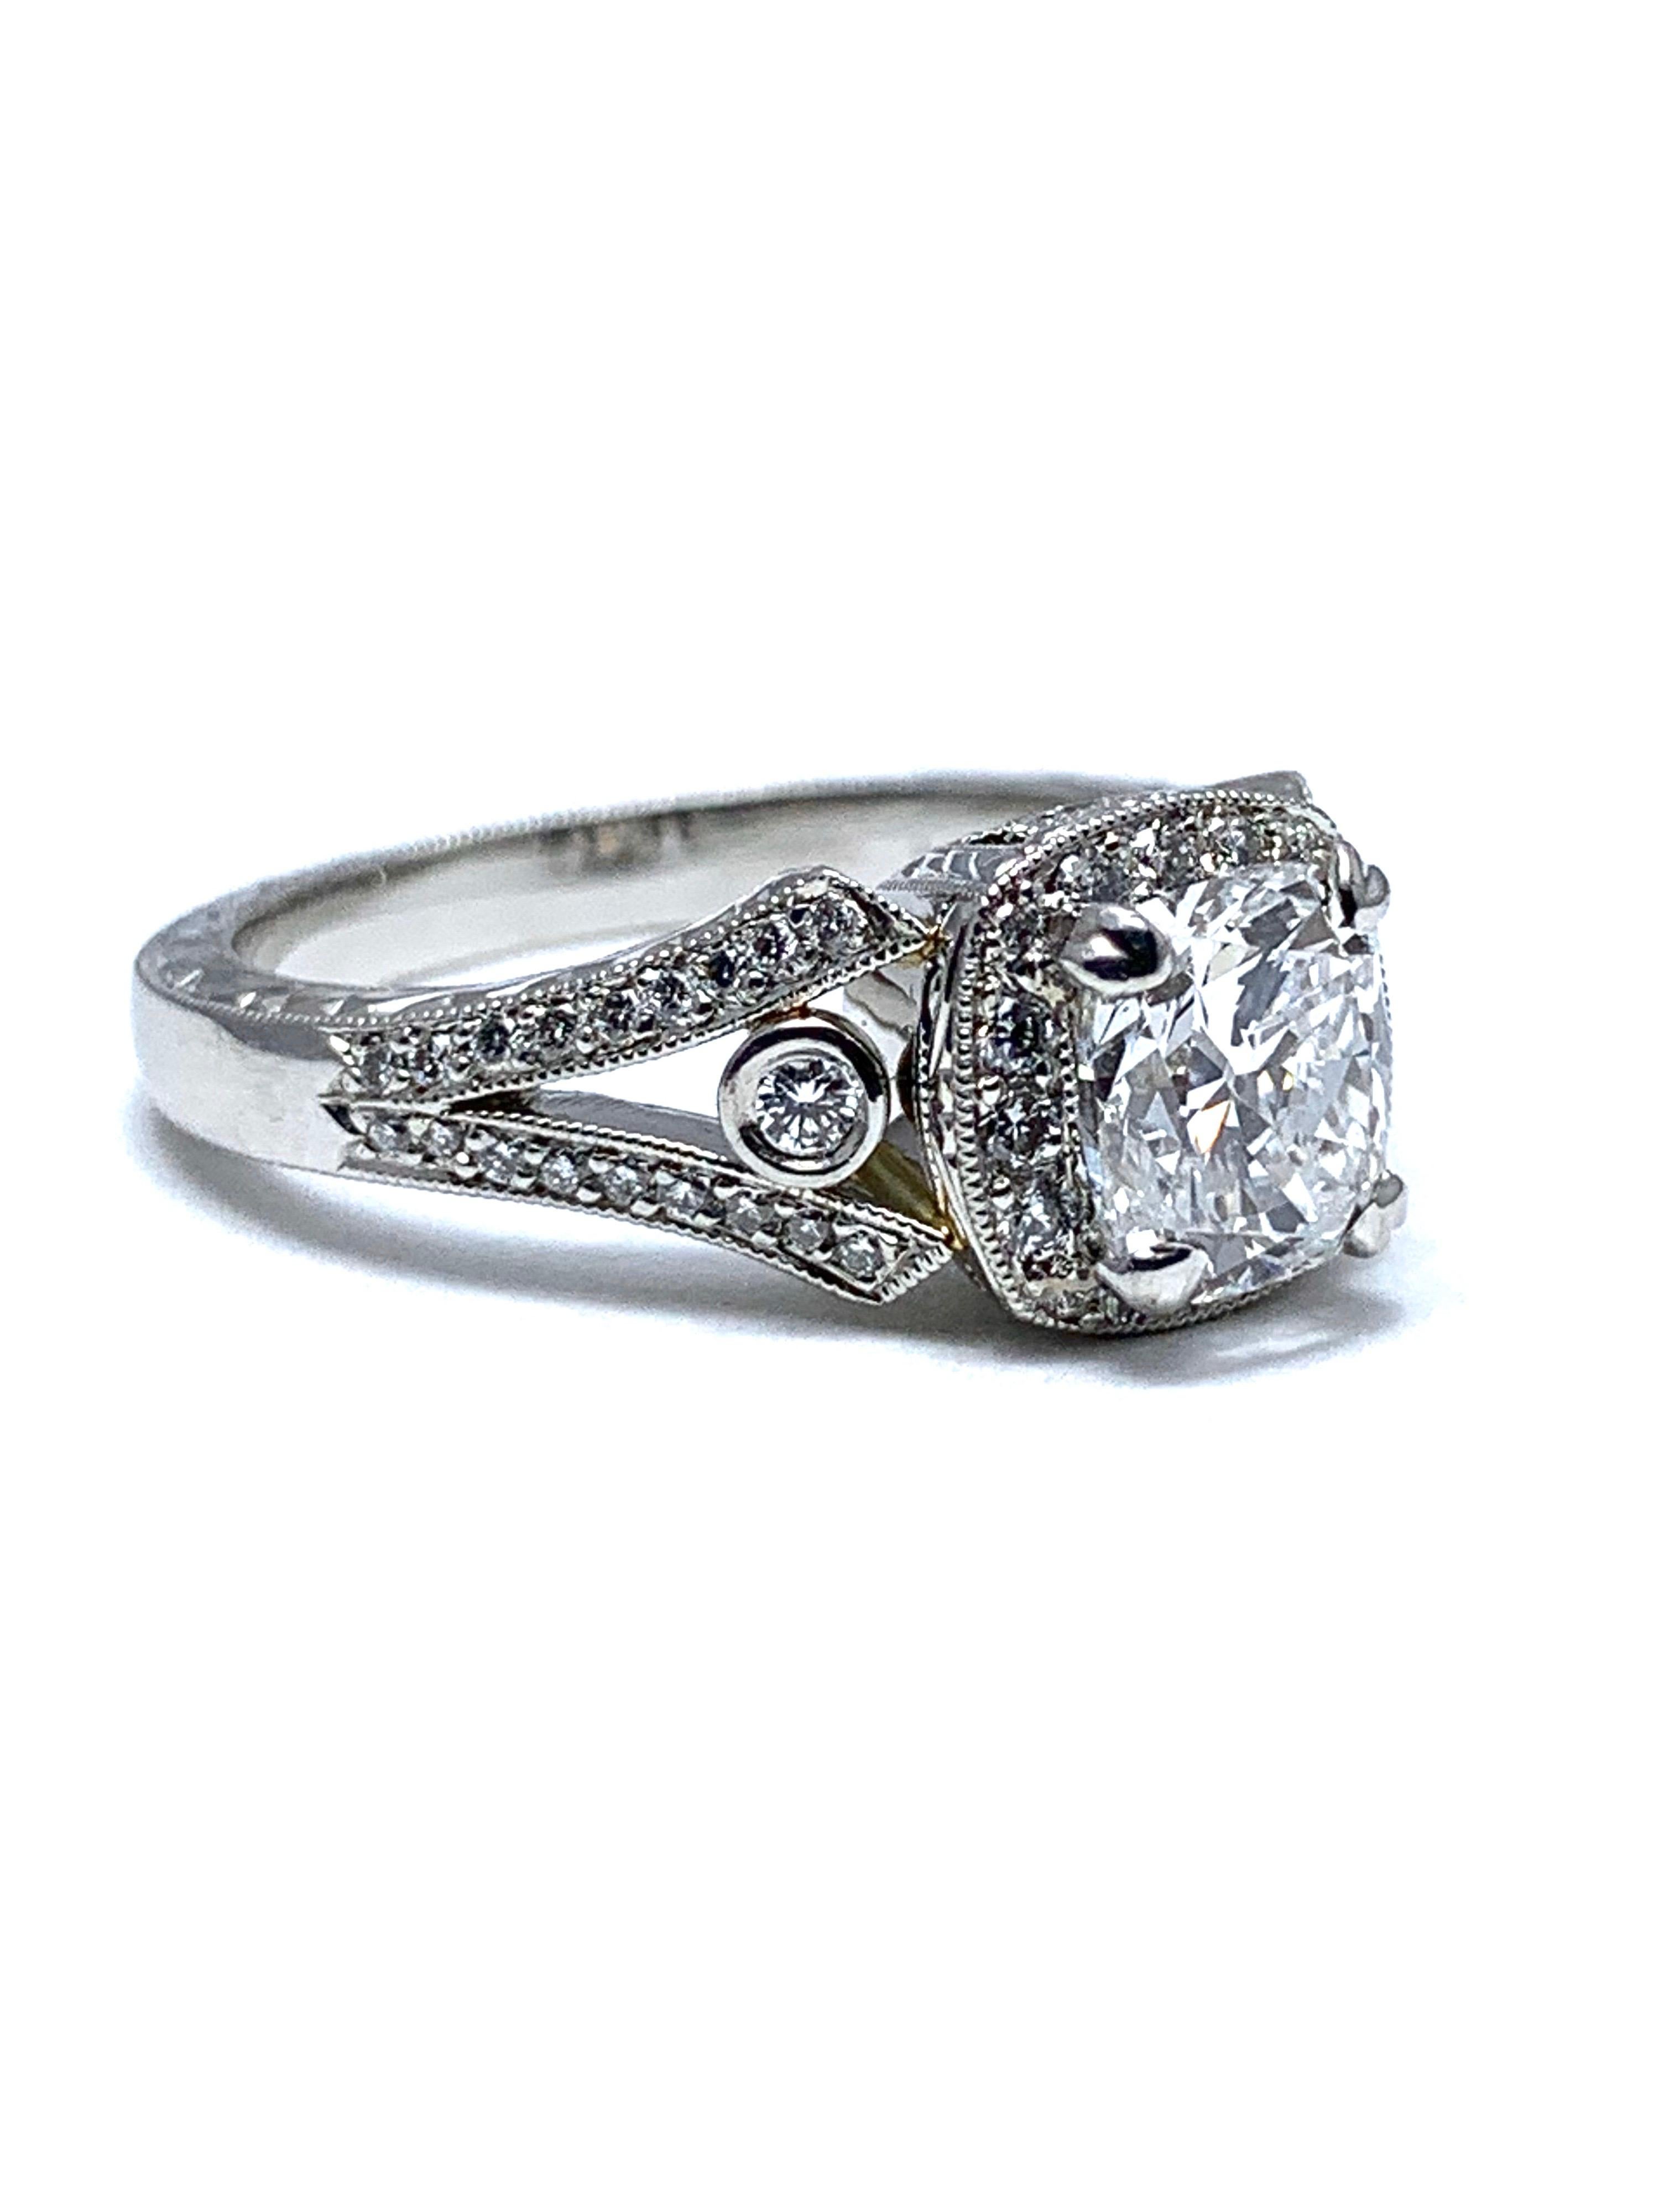 1.03 Carat D/SI1 Diamond with Diamond Halo and Hand Engraved Platinum Ring In Excellent Condition For Sale In Chevy Chase, MD